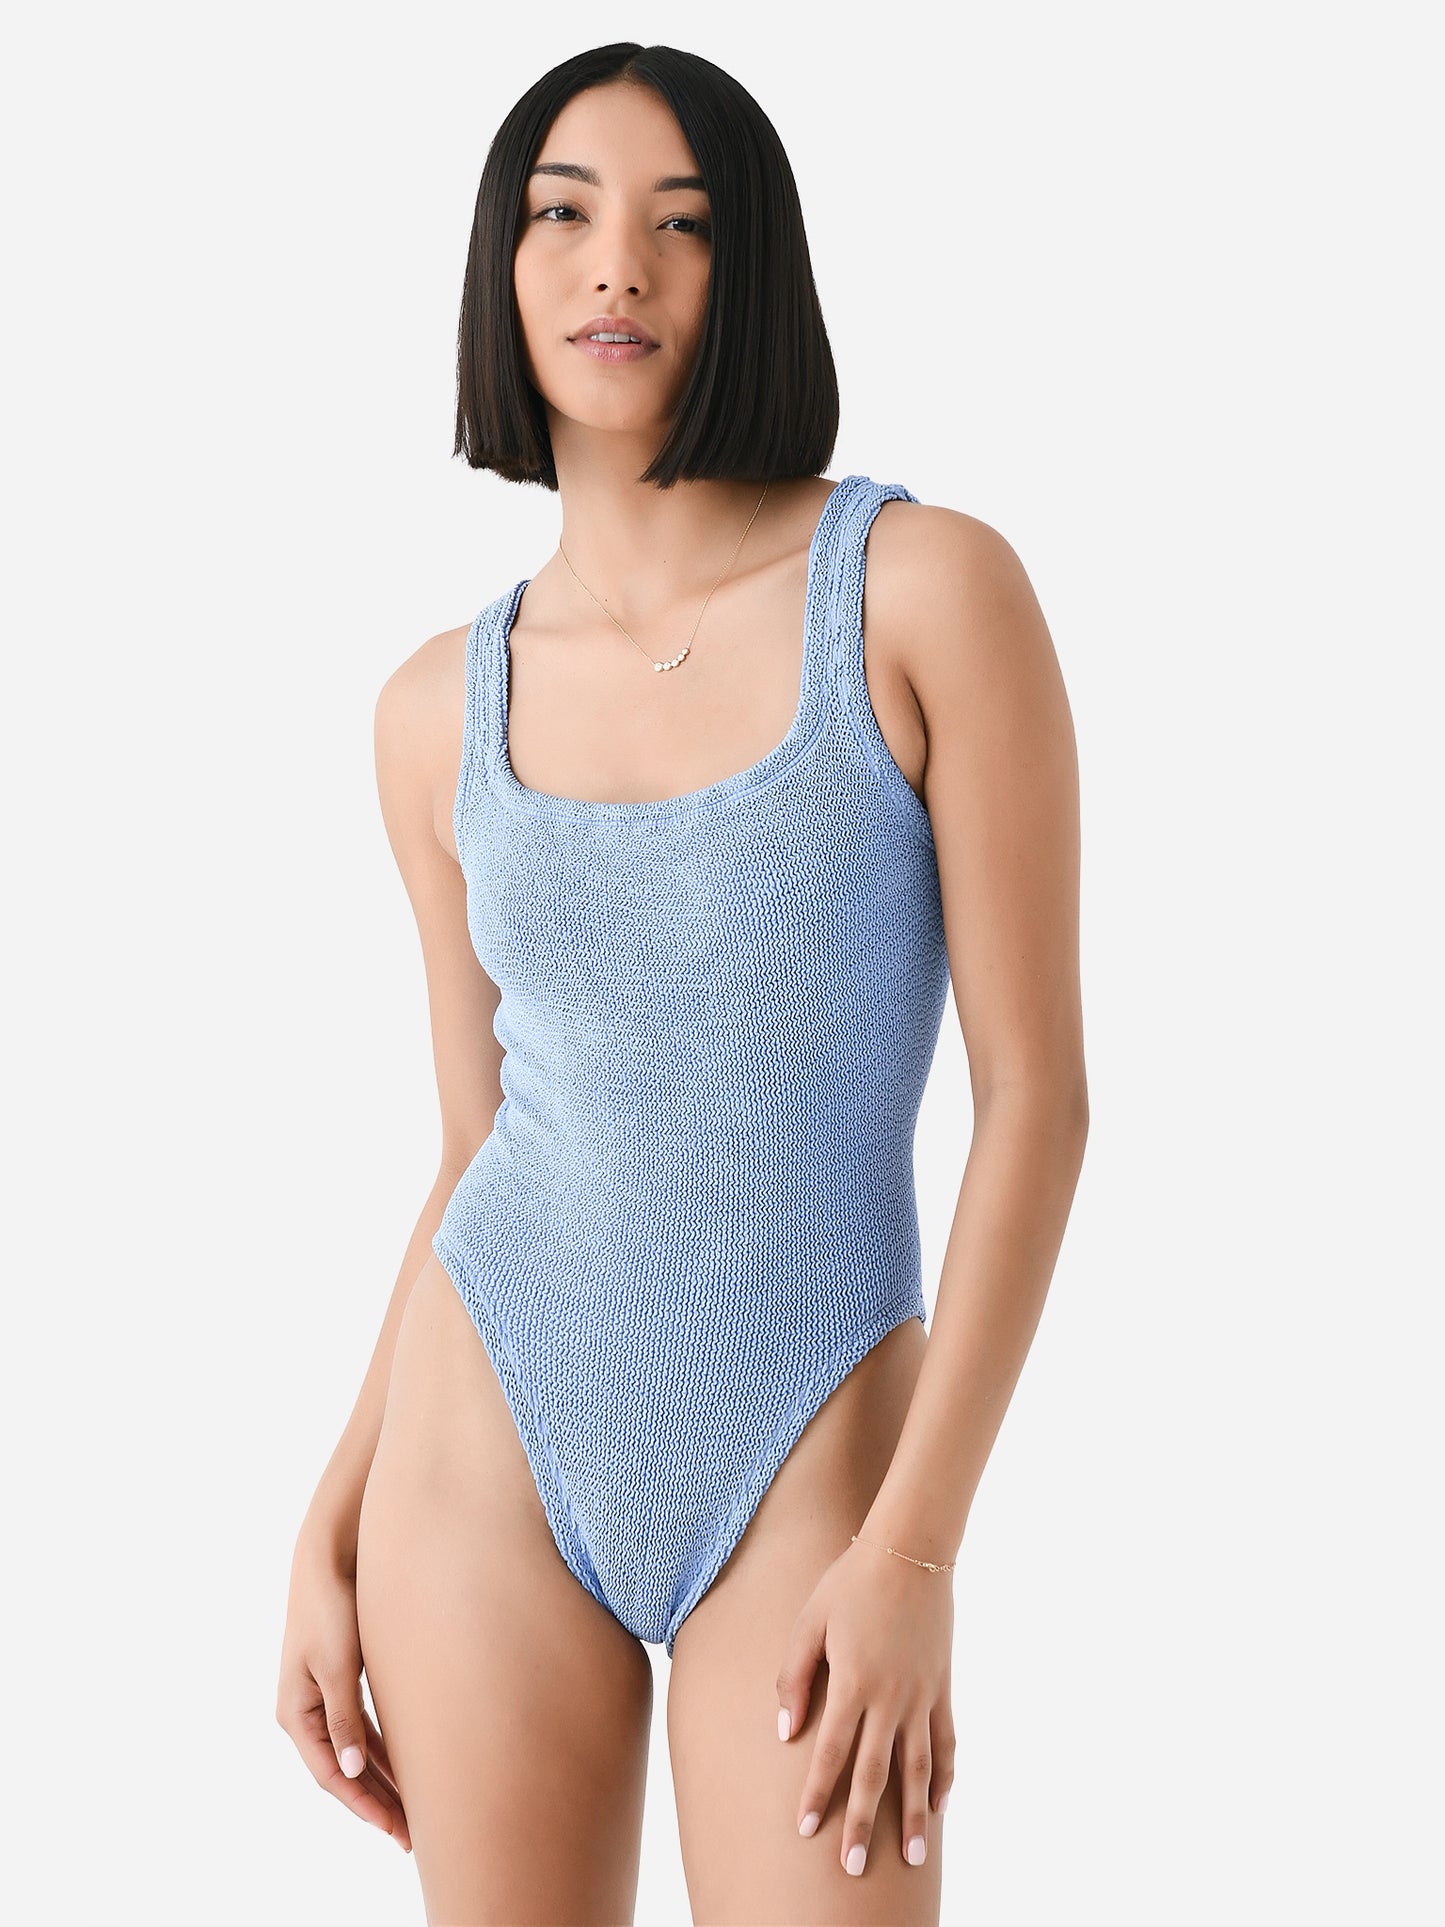 Hunza G Women's Square Neck One-Piece Swimsuit